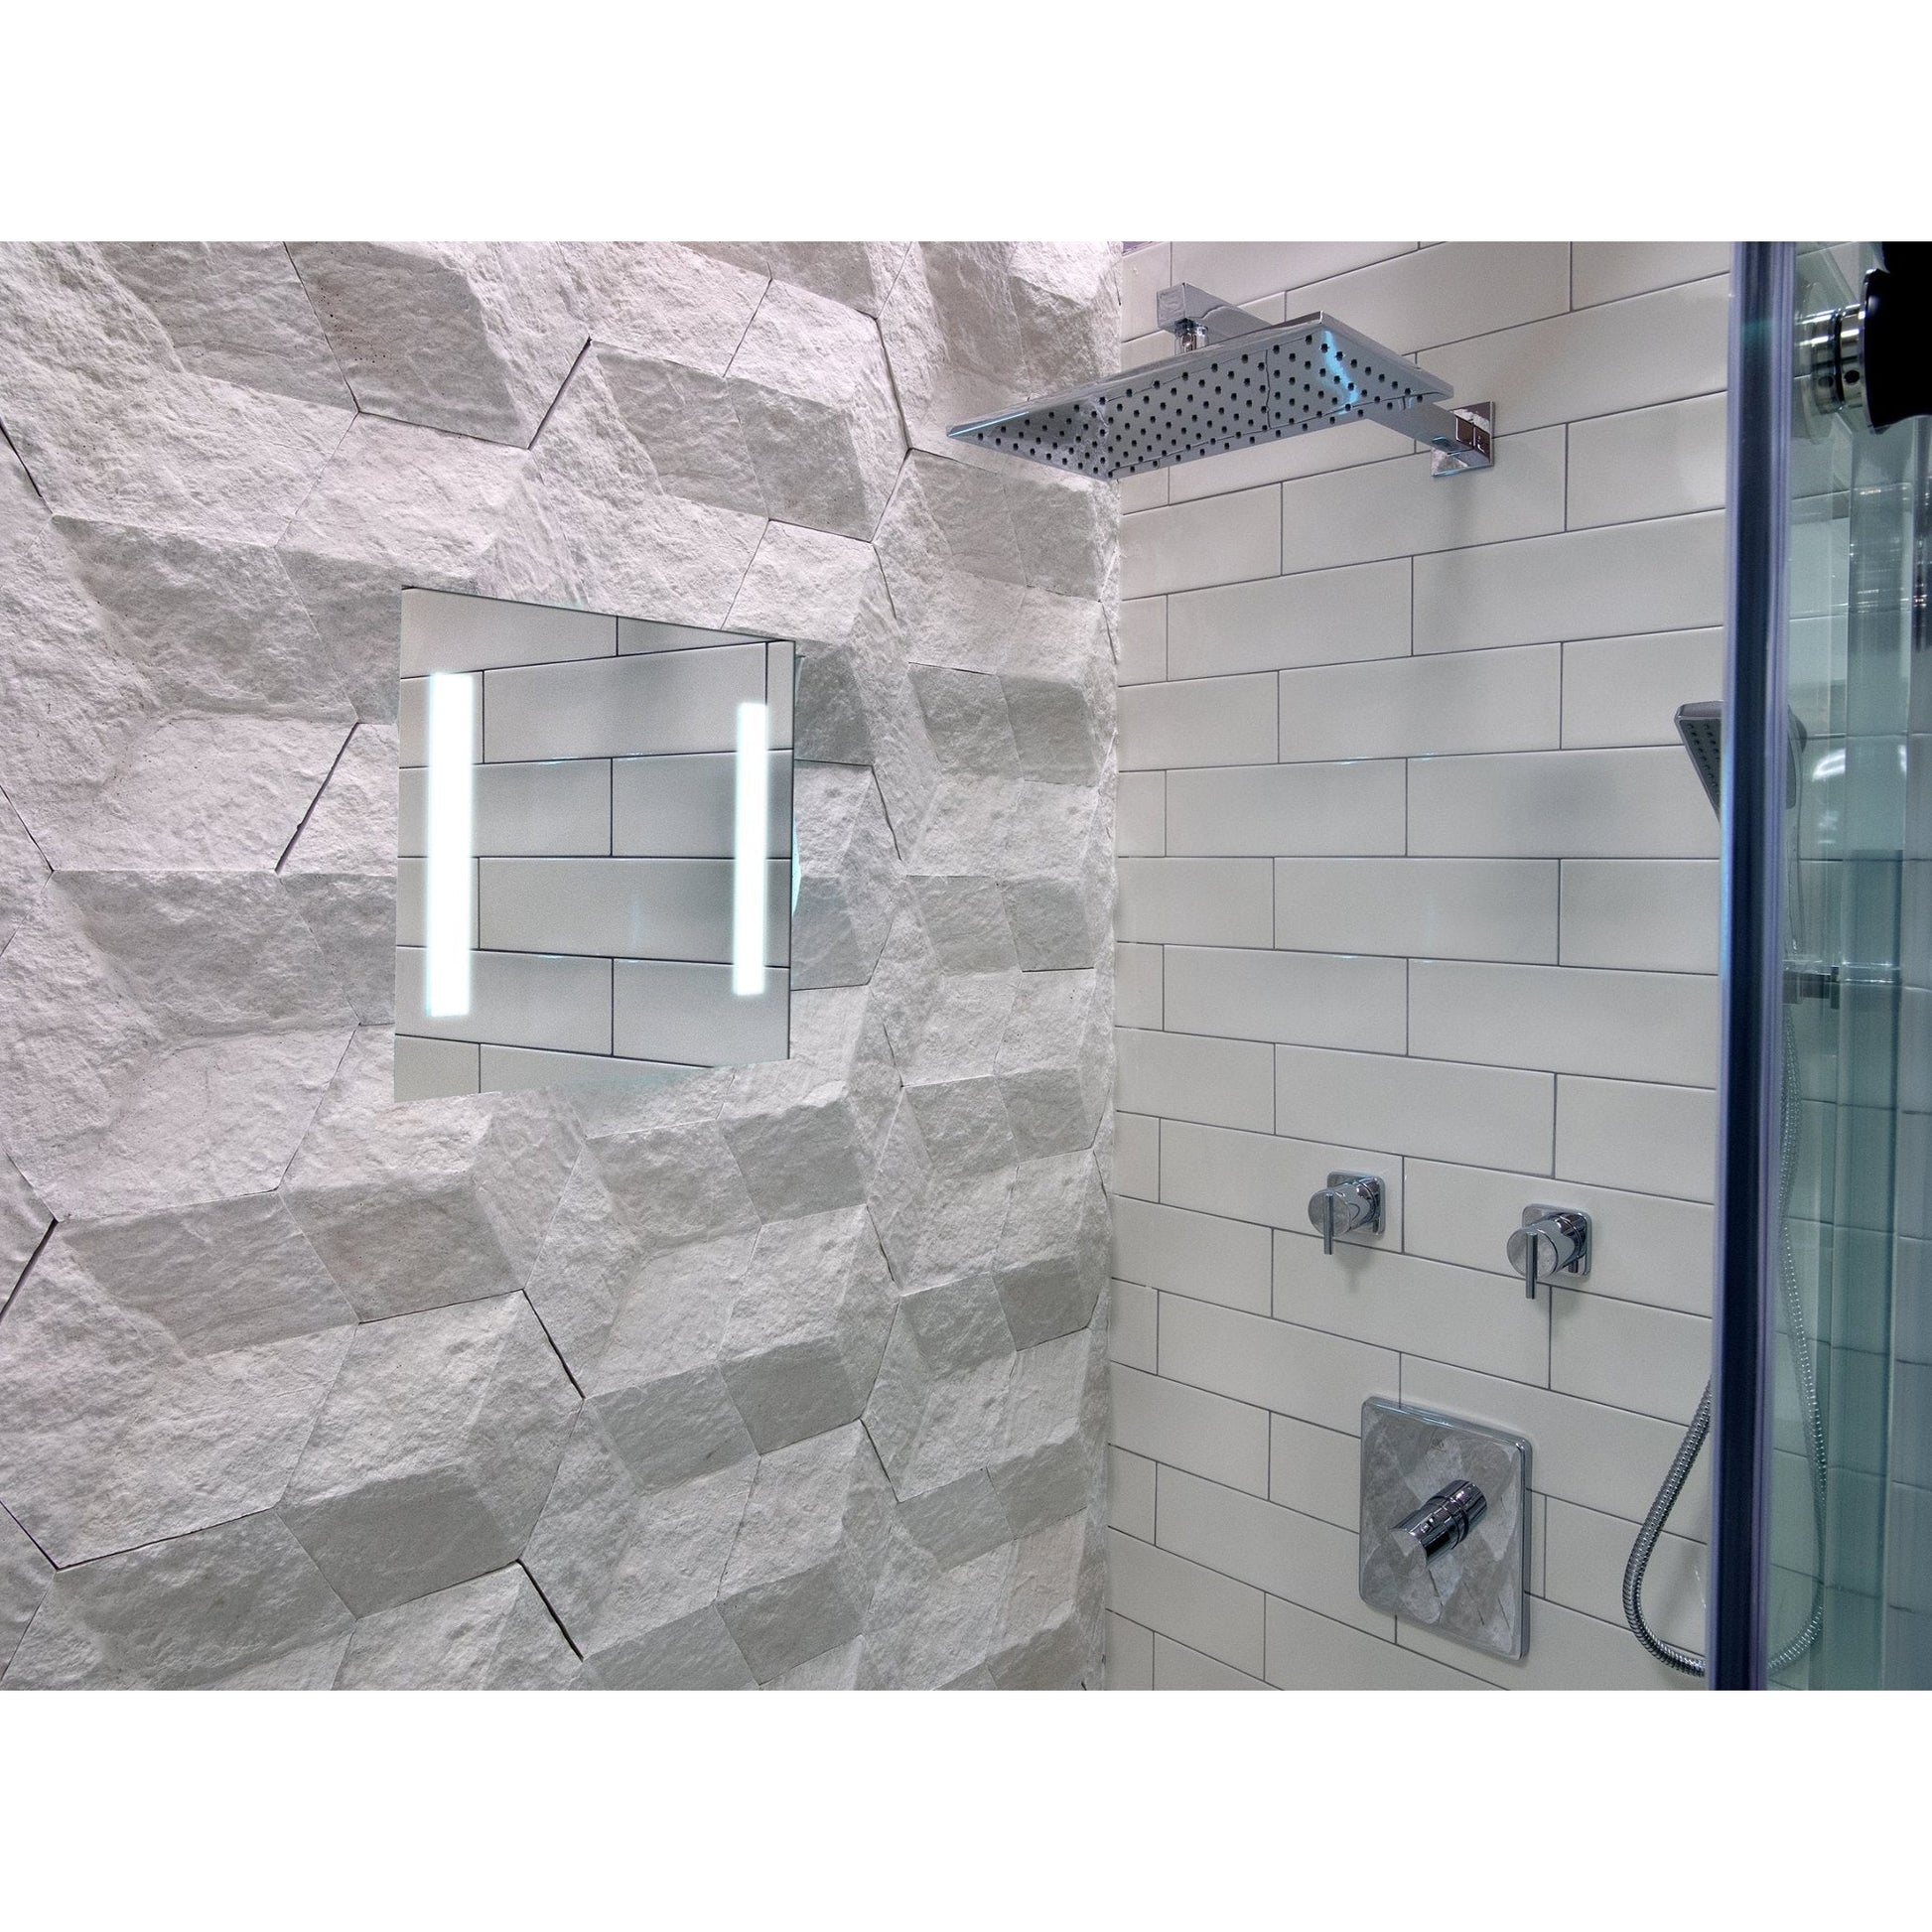 ClearMirror ShowerLite 18" x 18" Fog-Free Shower Mirror With LED Light Panels and Heating Pad